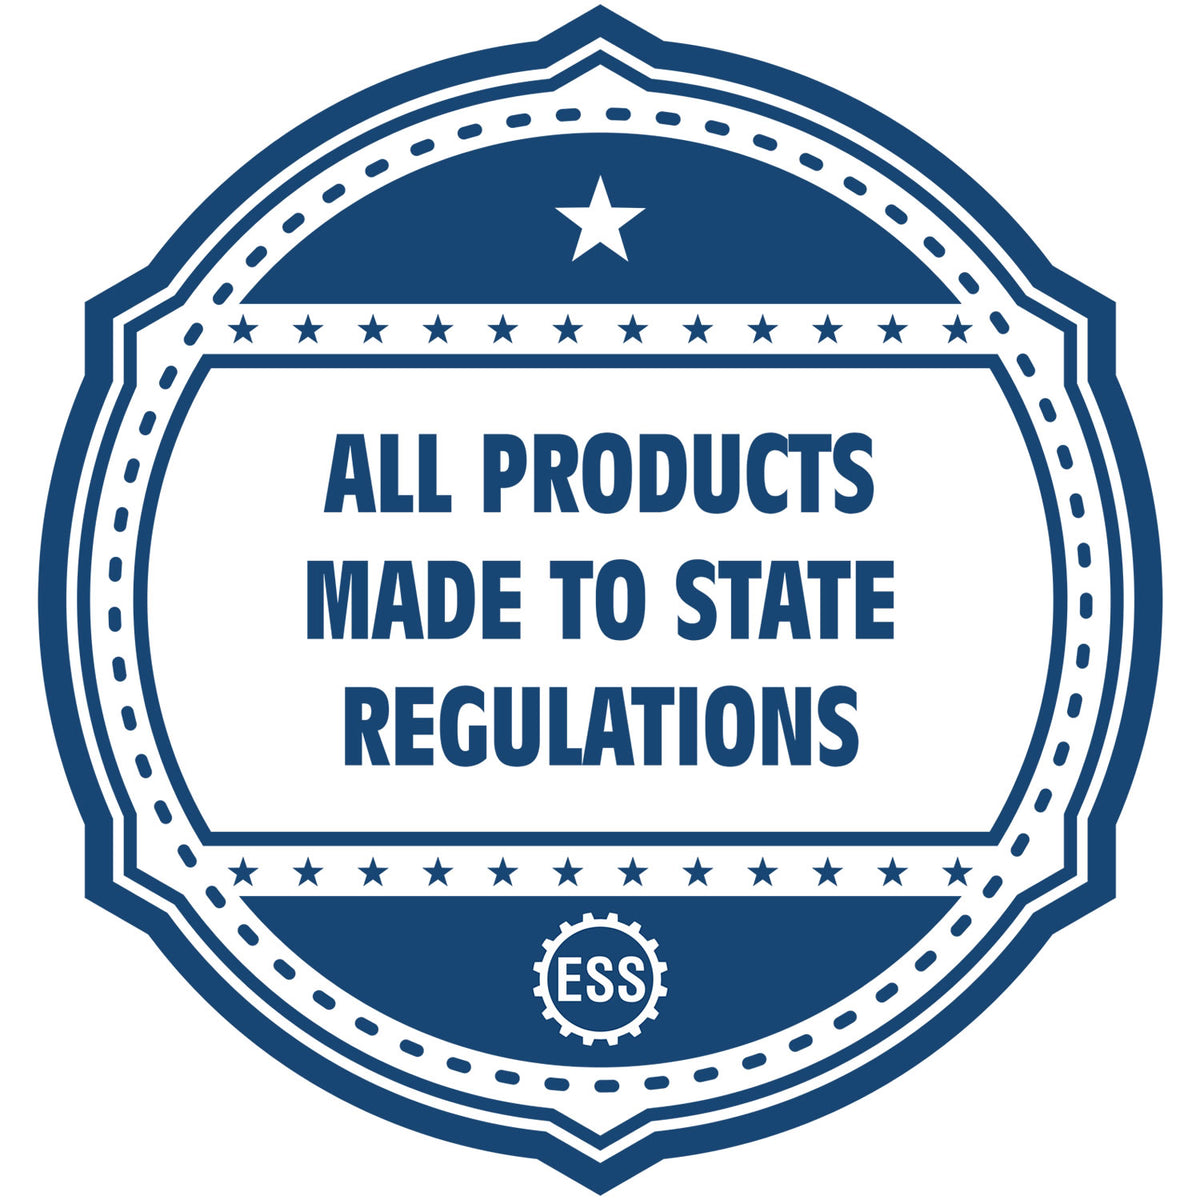 An icon or badge element for the Handheld Georgia Professional Engineer Embosser showing that this product is made in compliance with state regulations.